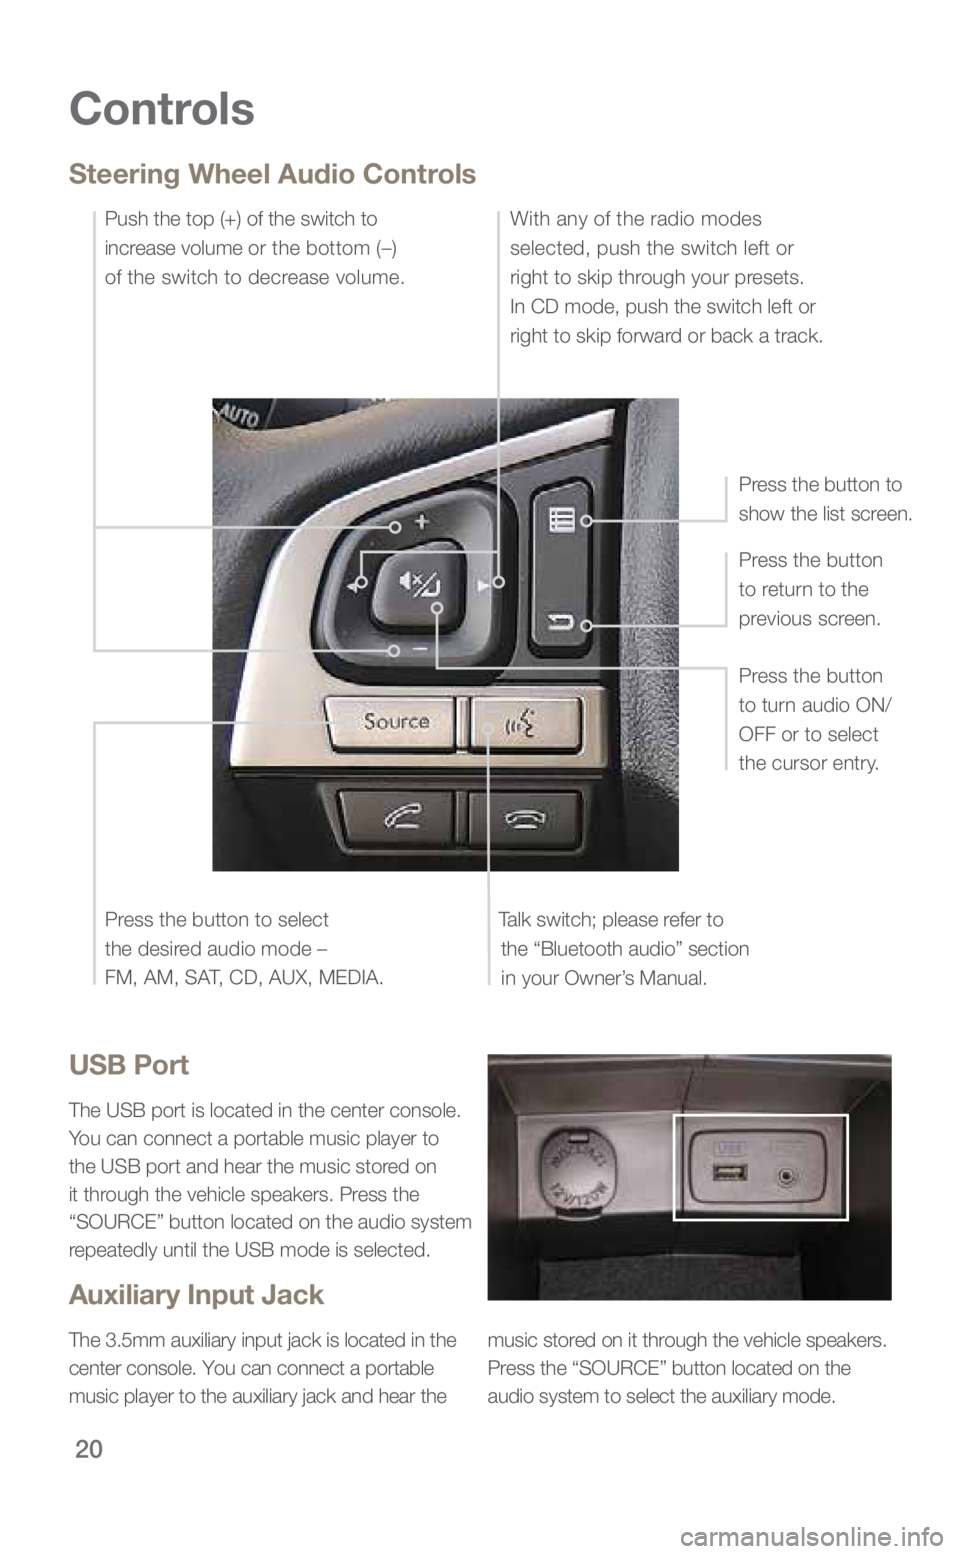 SUBARU FORESTER 2018  Quick Guide 20
Controls
Steering Wheel Audio Controls
Talk switch; please refer to the “Bluetooth audio” section in your Owner’s Manual. Press the button 
to turn audio ON/
OFF or to select 
the cursor entr